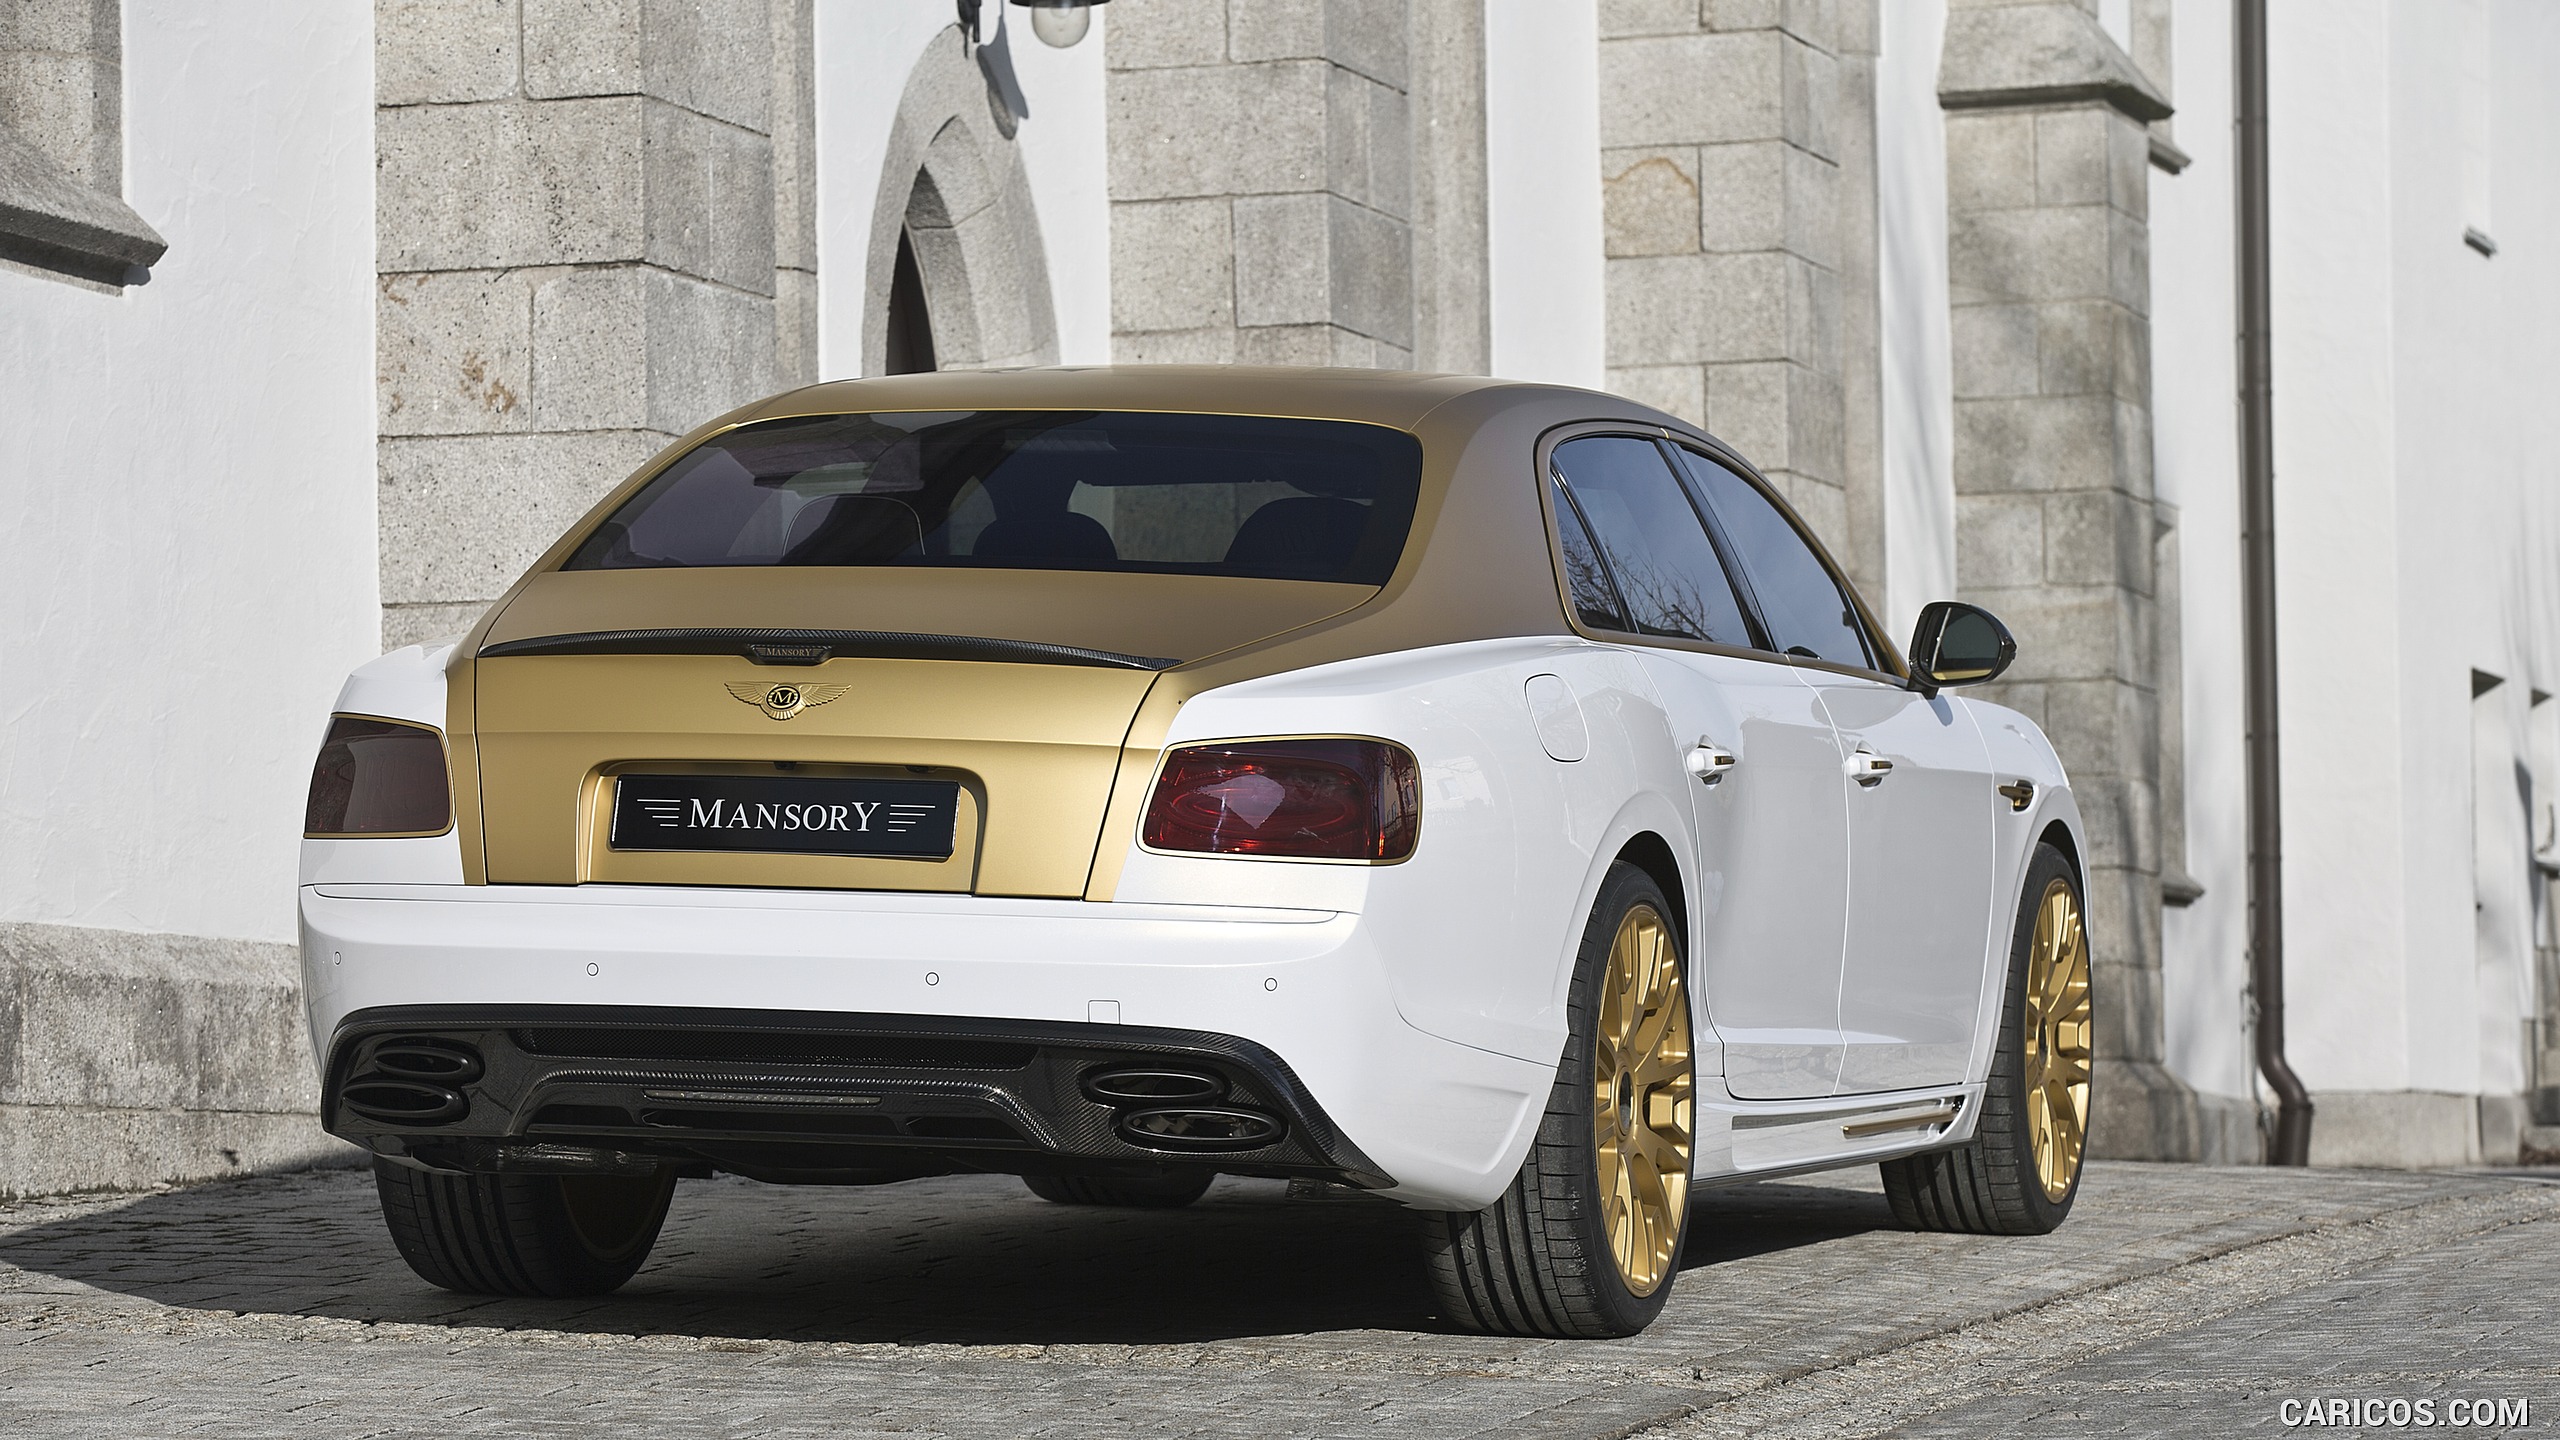 2016 MANSORY Bentley Flying Spur - Rear, #2 of 7